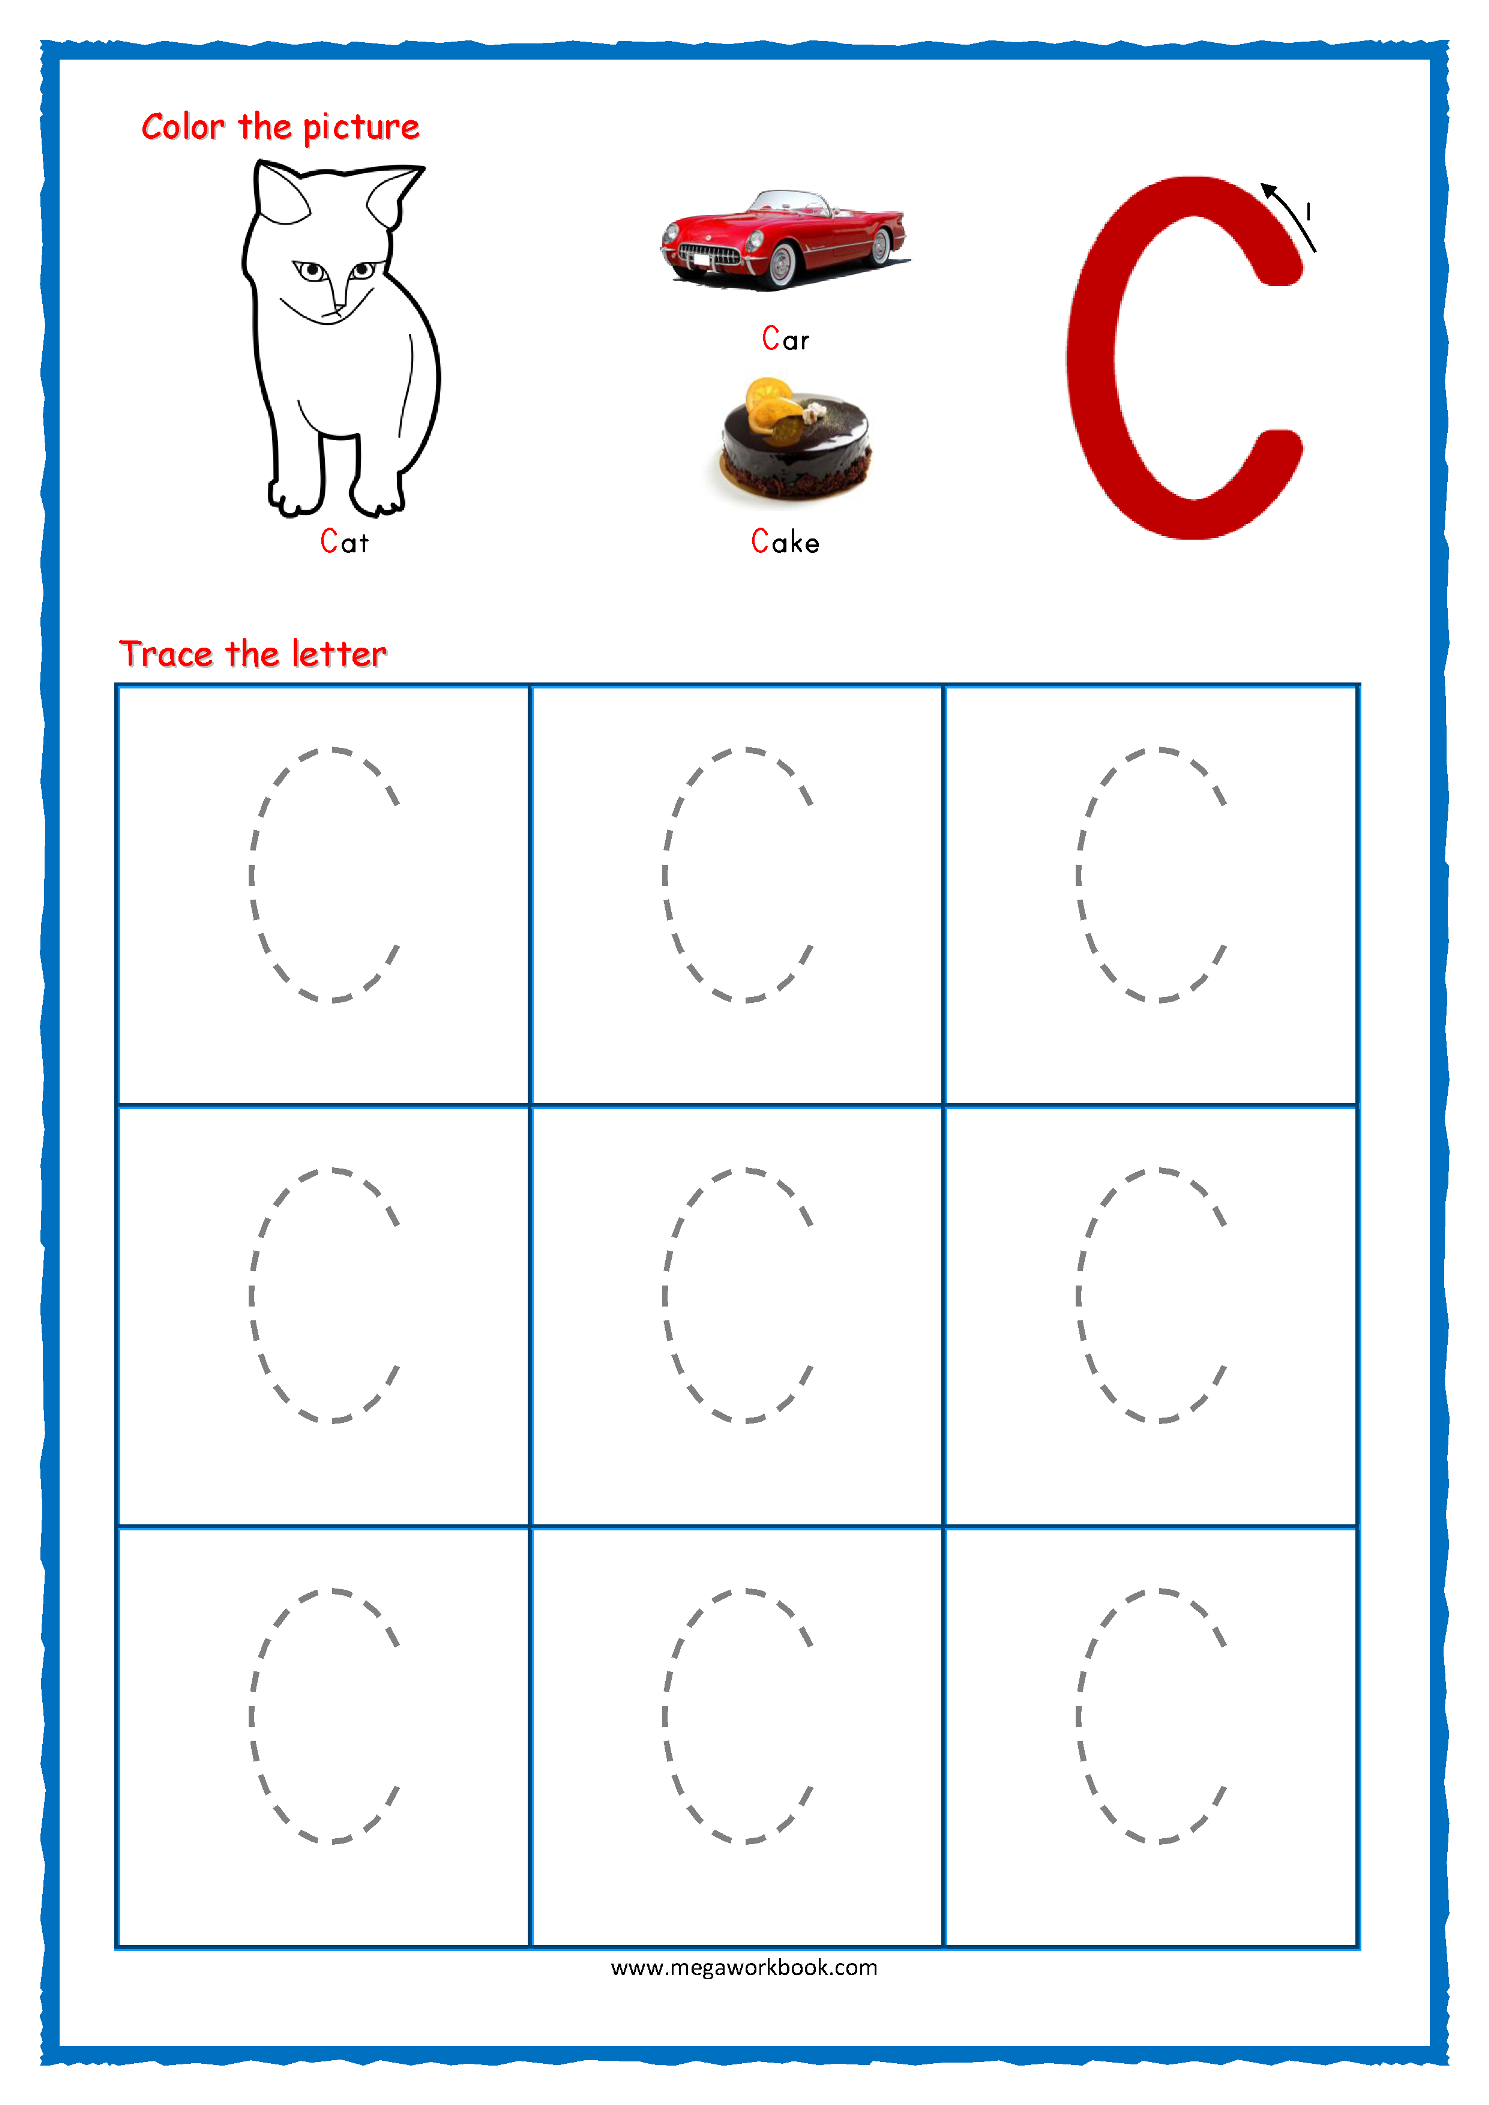 Tracing Letters - Alphabet Tracing - Capital Letters with Alphabet Tracing Letters For Preschoolers